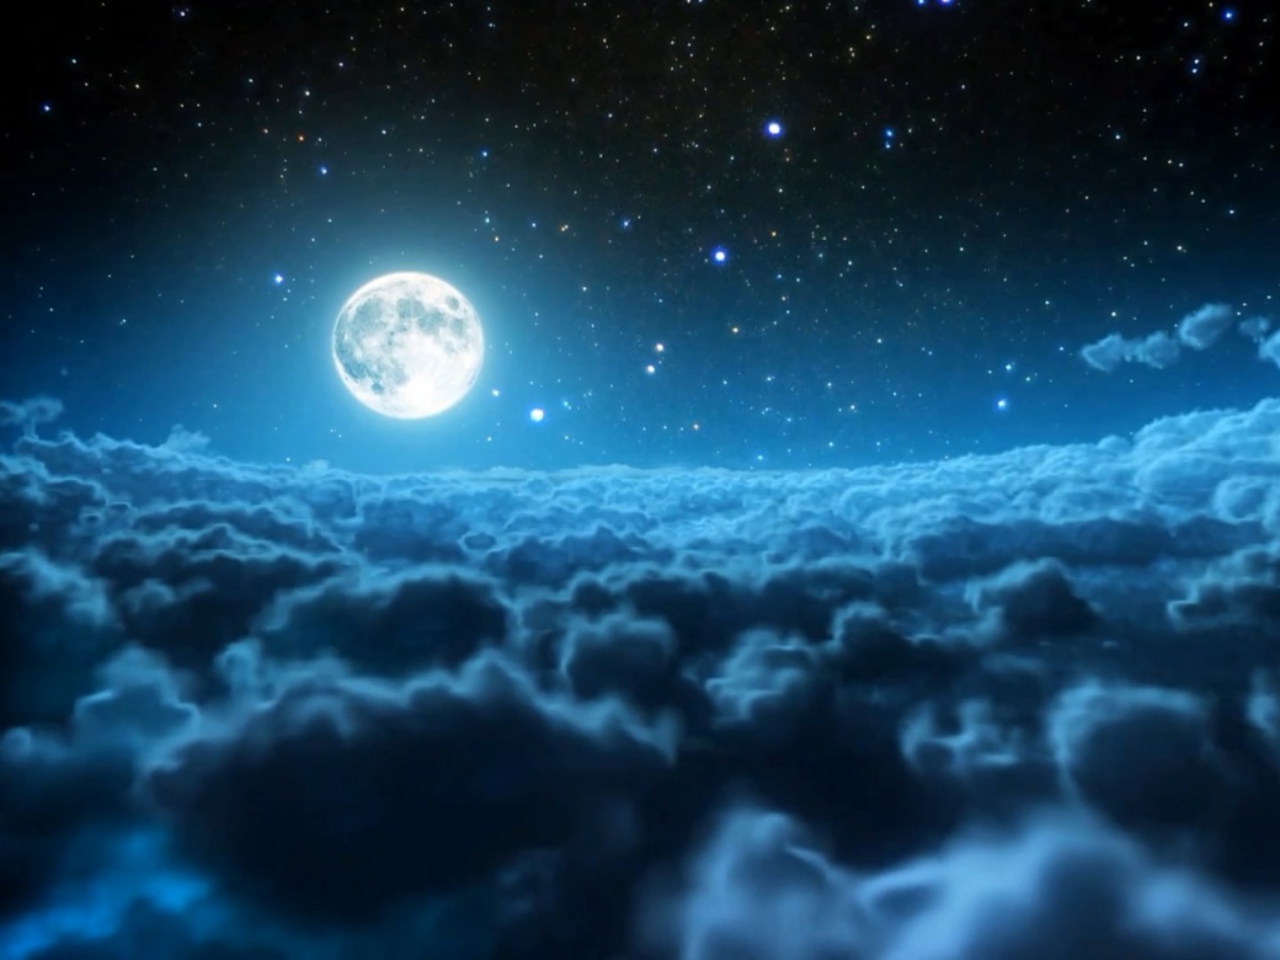 Cloudy Night And Sparkling Moon wallpaper 1280x960